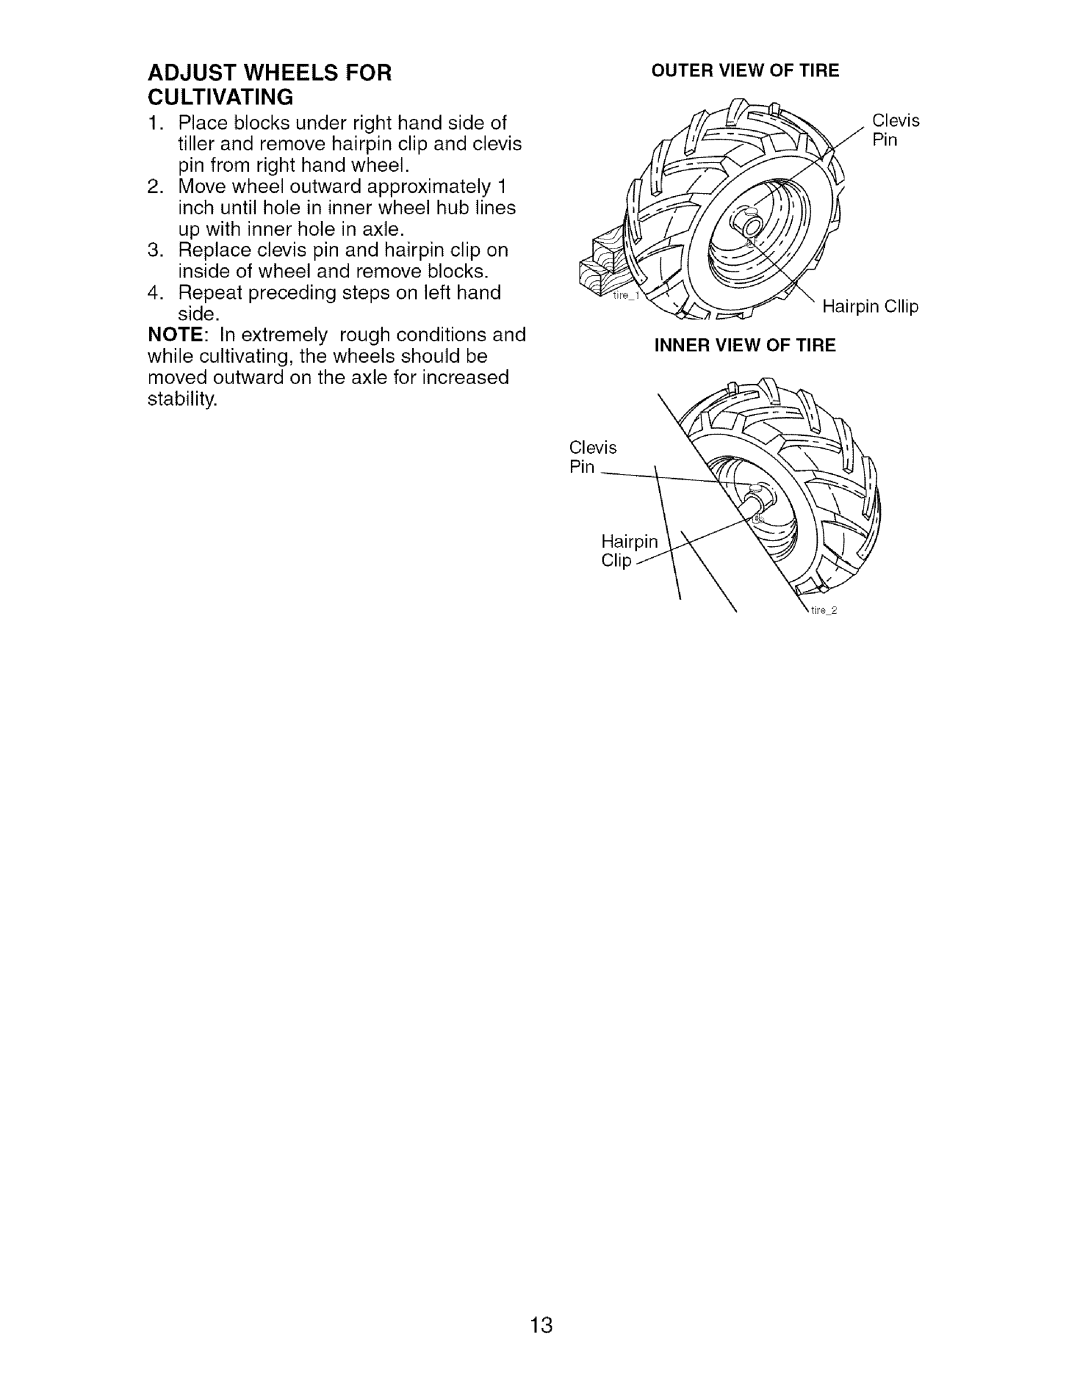 Craftsman 917.29604 owner manual Adjust Wheels For Cultivating, Outer View Of Tire, Inner View Of Tire 